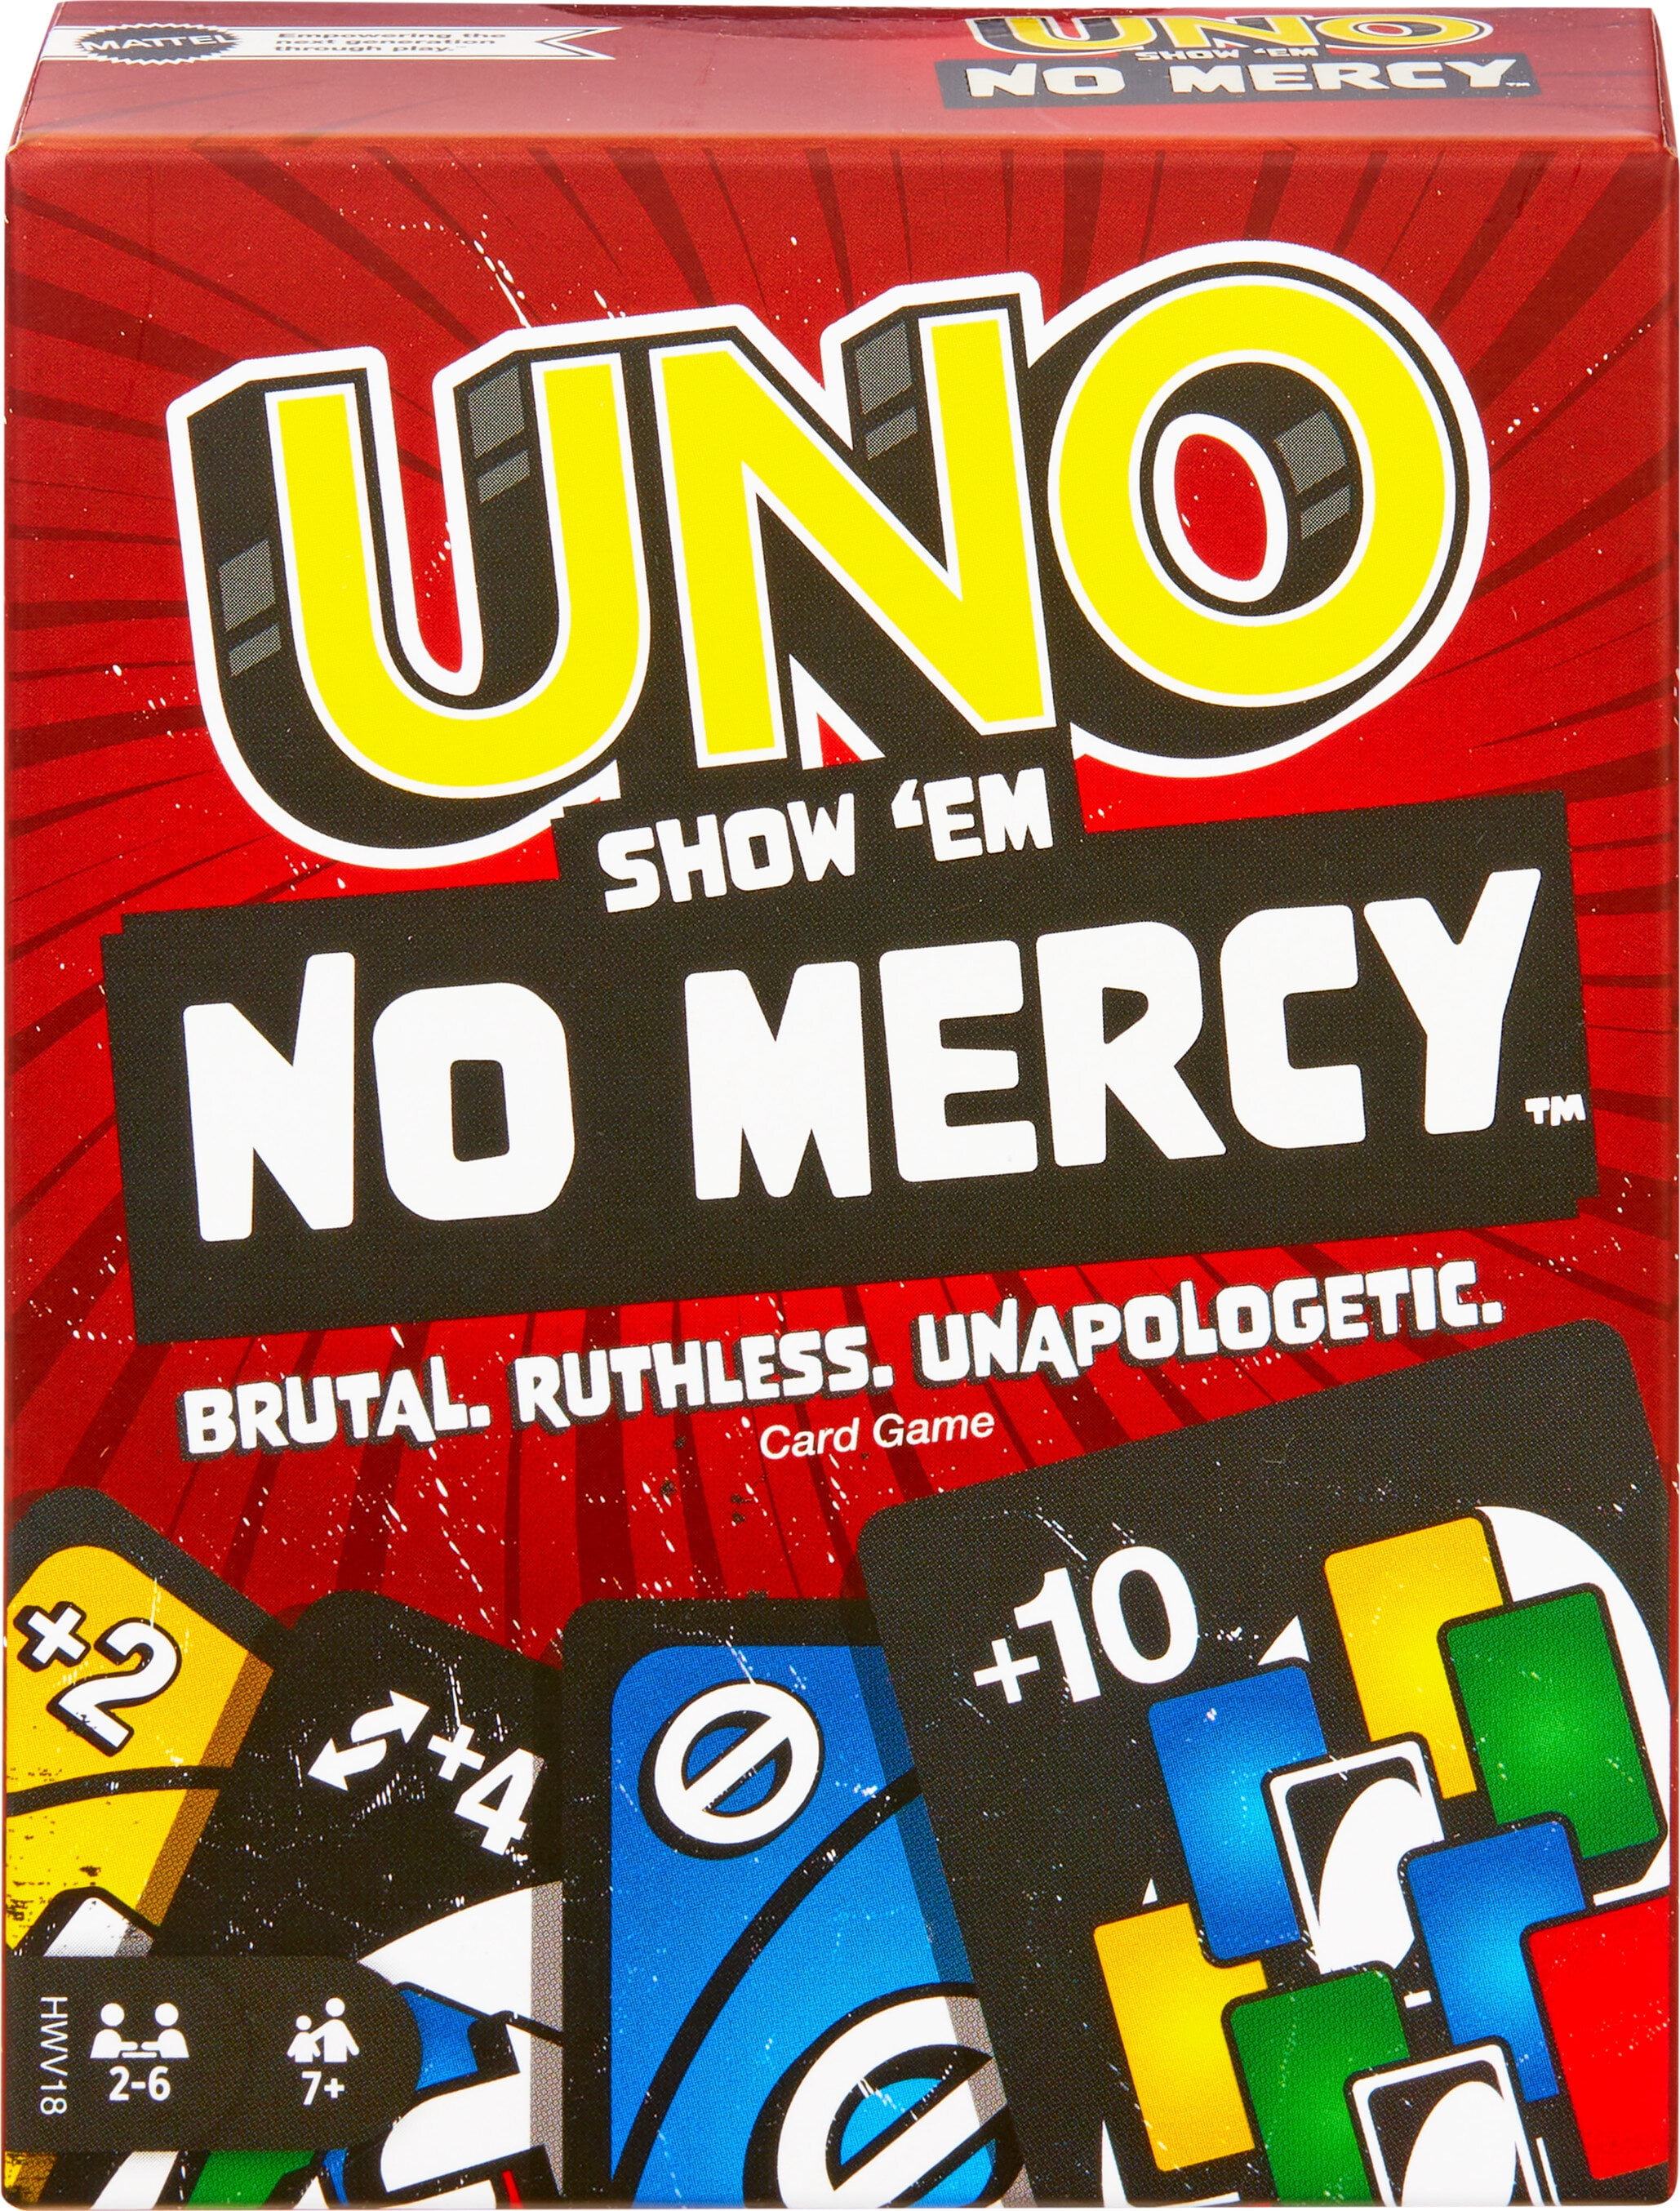 UNO Show 'em No Mercy Card Game $9.97 + Free Shipping w/ Walmart+ or on $35+